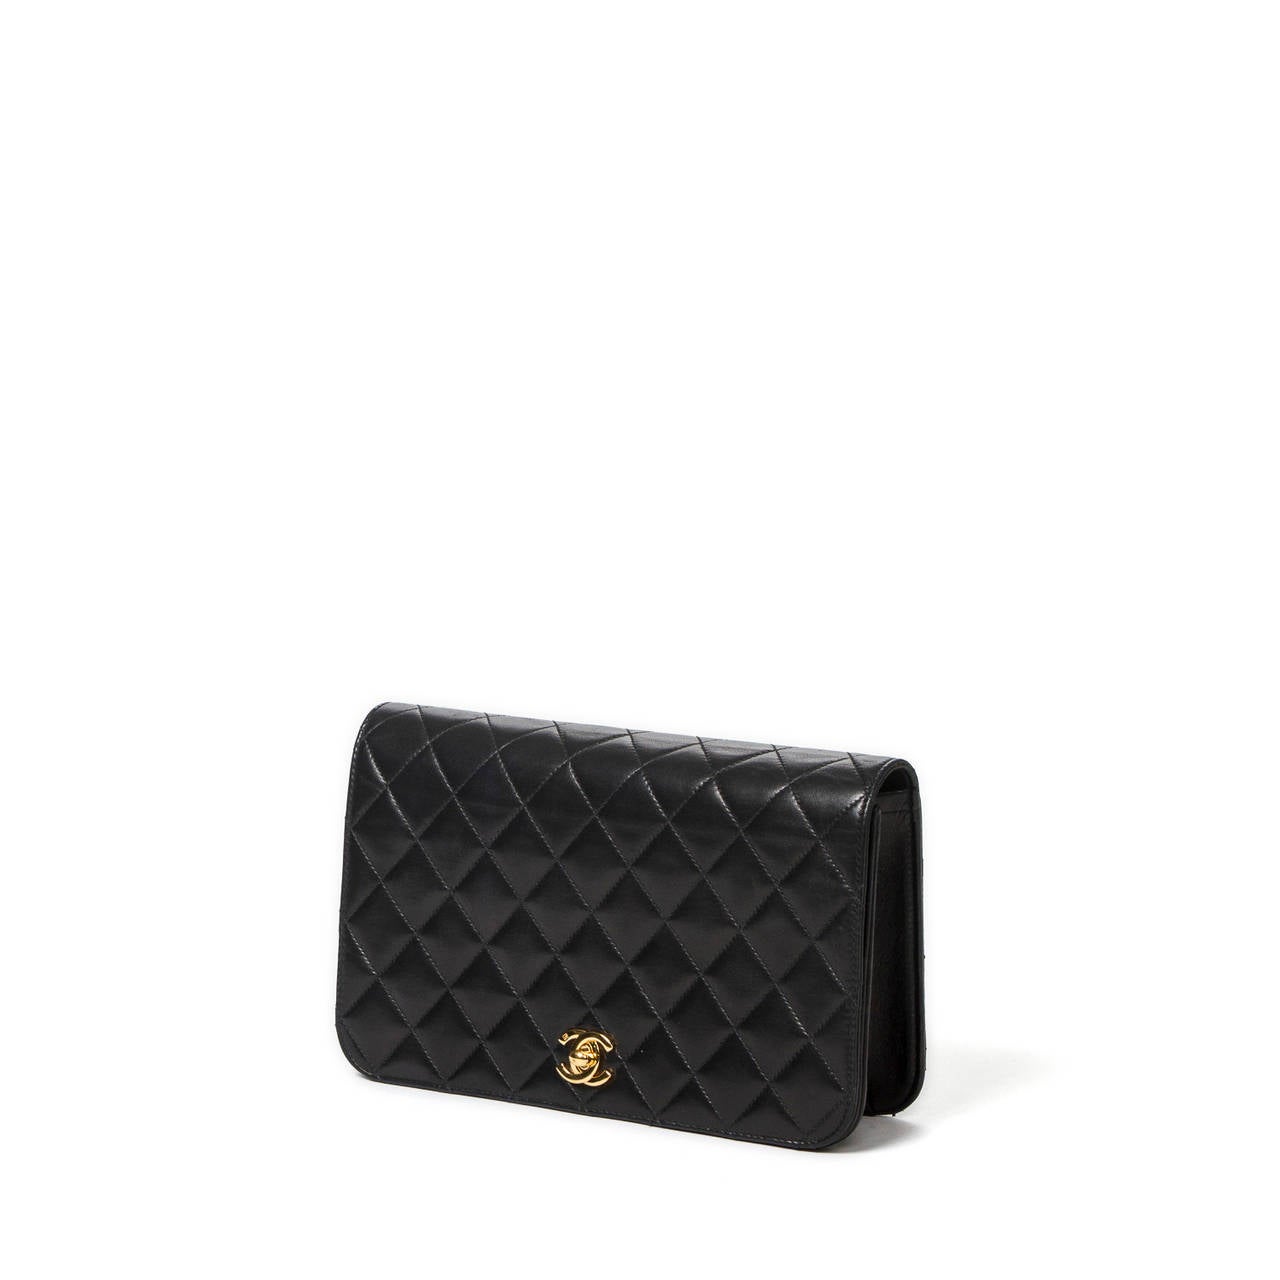 Mademoiselle pouch shoulder bag in black quilted leather with chain strap interlaced with leather, CC turnlock, gold tone hardware. Burgundy leather interior with one zip pocket. Box and authenticy card included. Few scuffs on the leather, Perfect